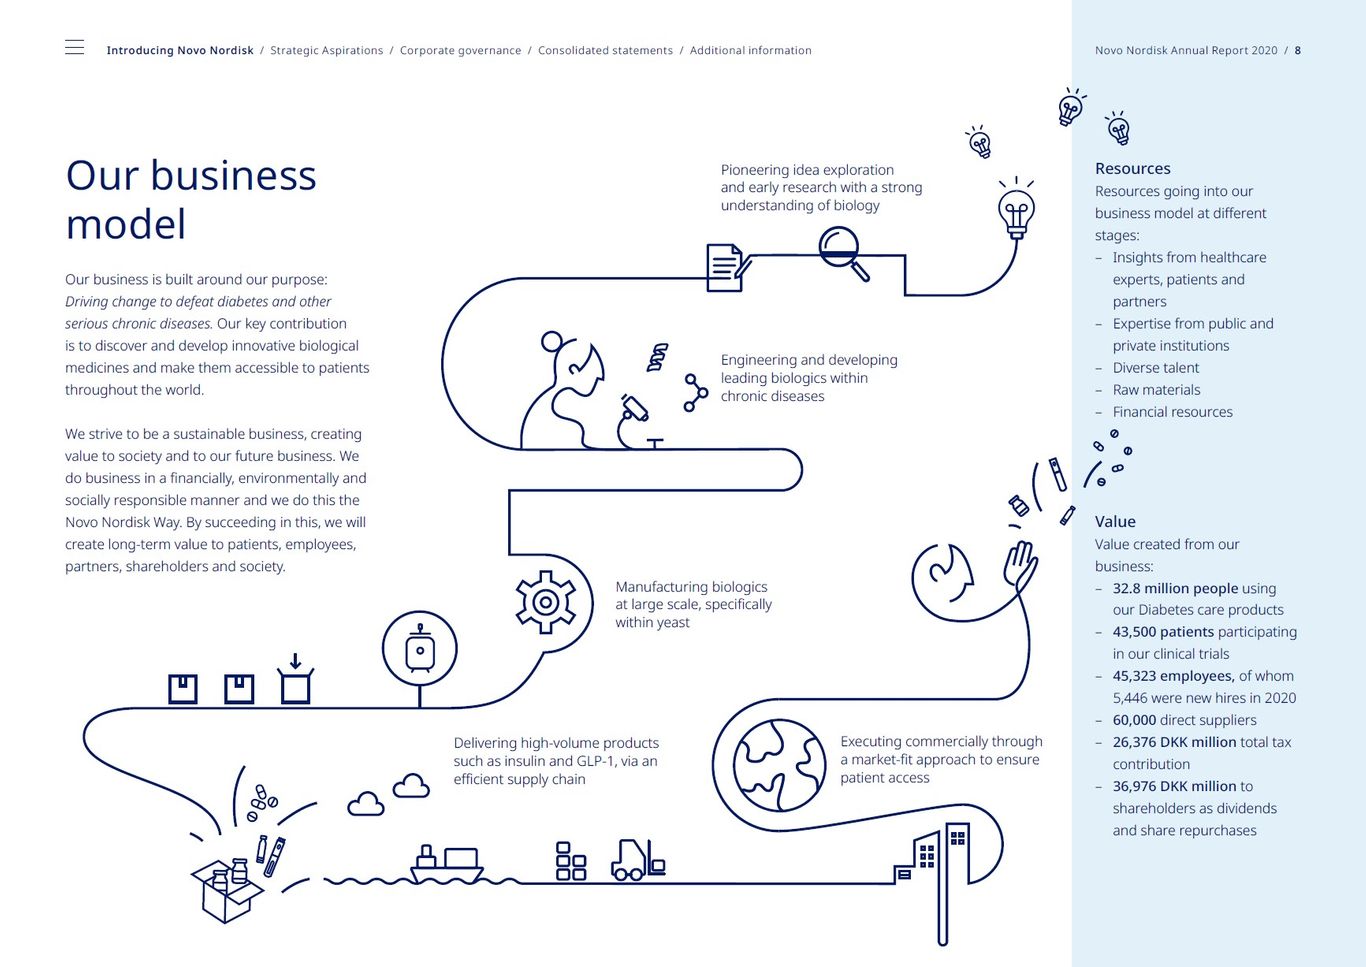 Screenshot from Novo Nordisk's annual report 2020